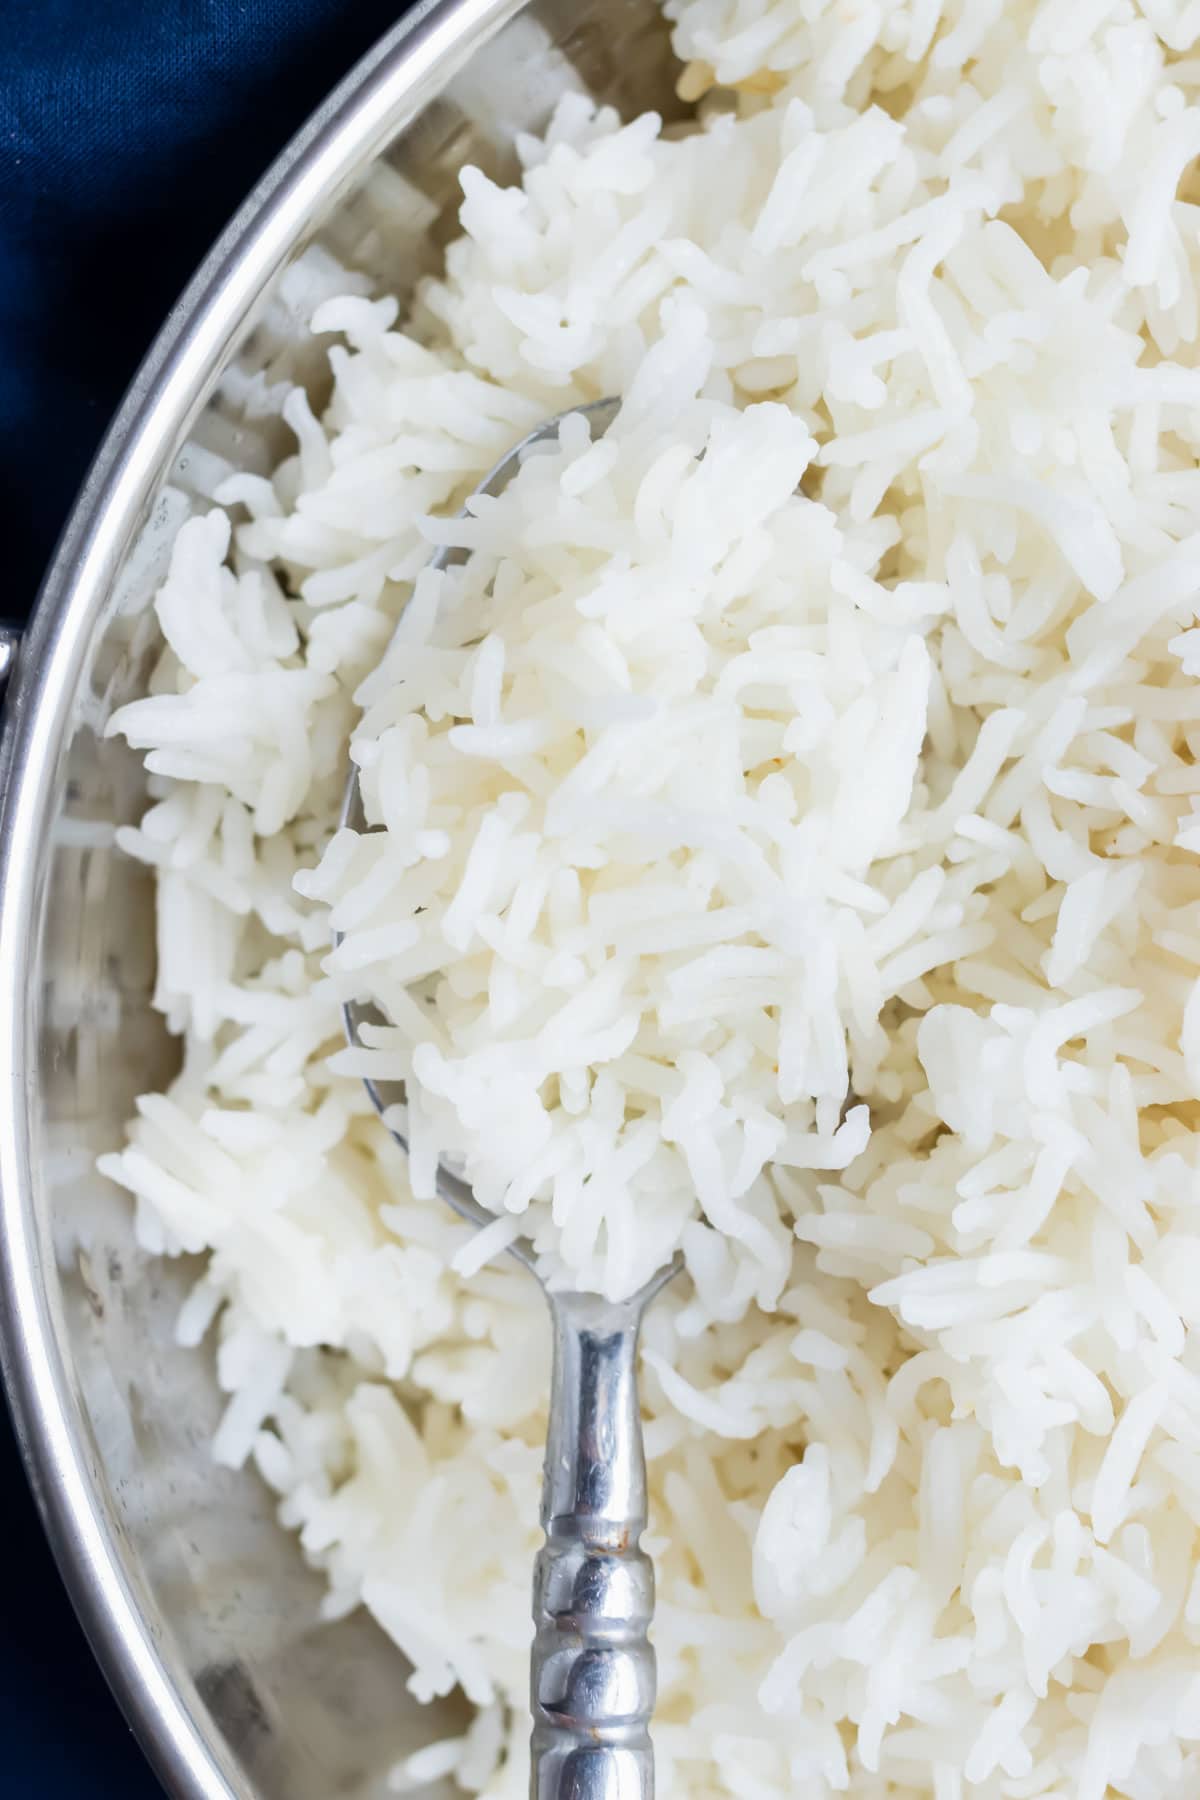 How To Make Basmati Rice in A Pressure Cooker, Indian Style recipe